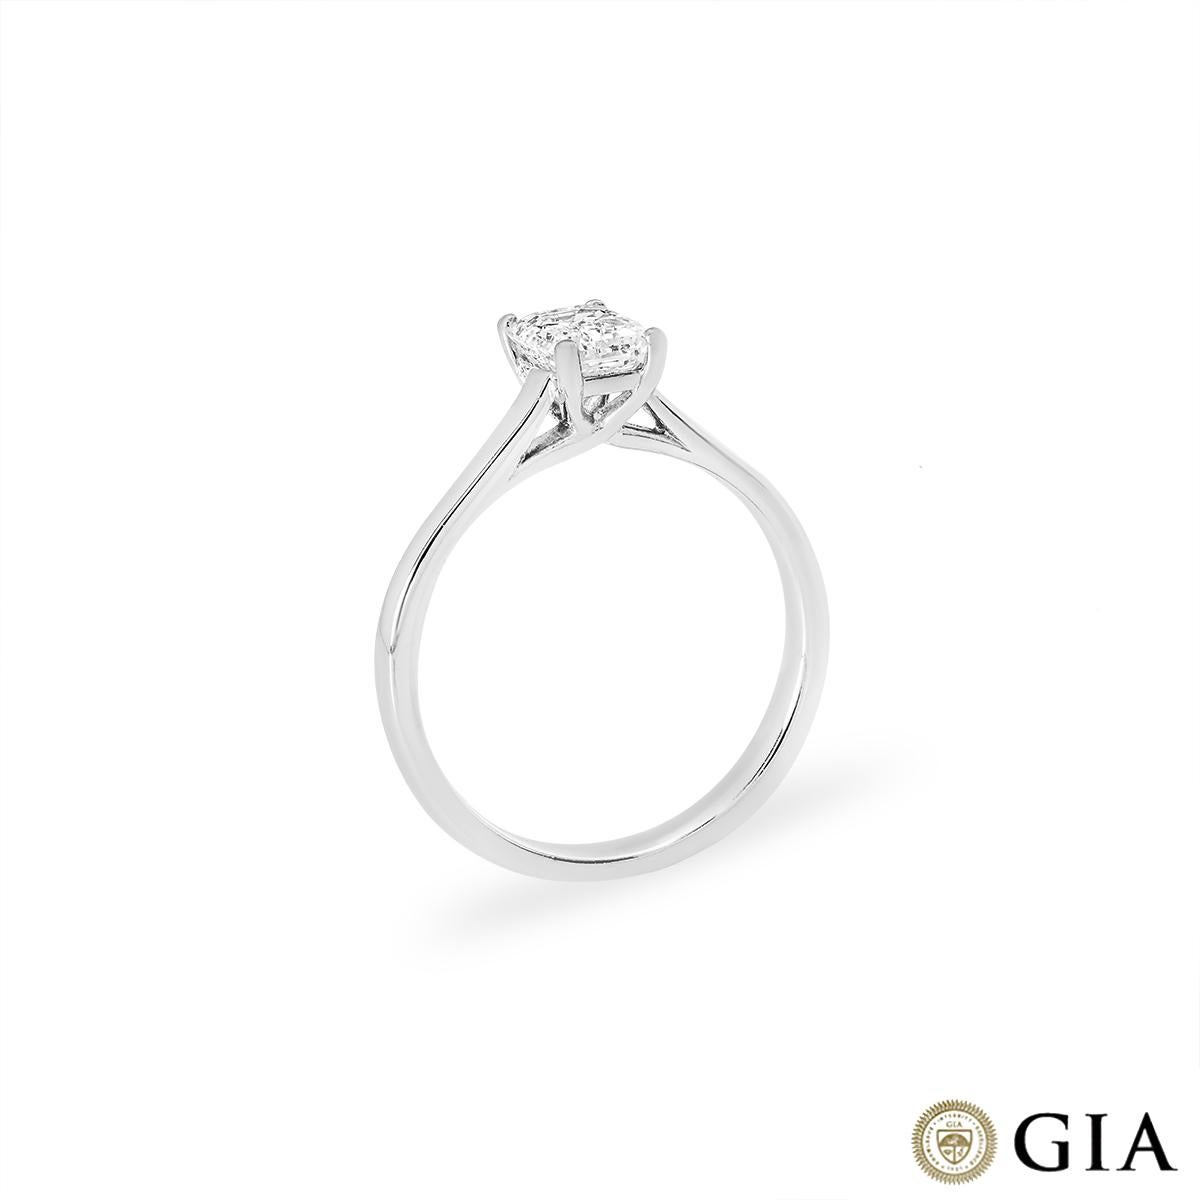 An amazing platinum diamond engagement ring. The solitaire features an emerald cut diamond set in a four prong mount weighing 0.74ct, D colour and IF clarity (internally flawless). The 2.2mm wide ring has a gross weight of 3.16 grams and is